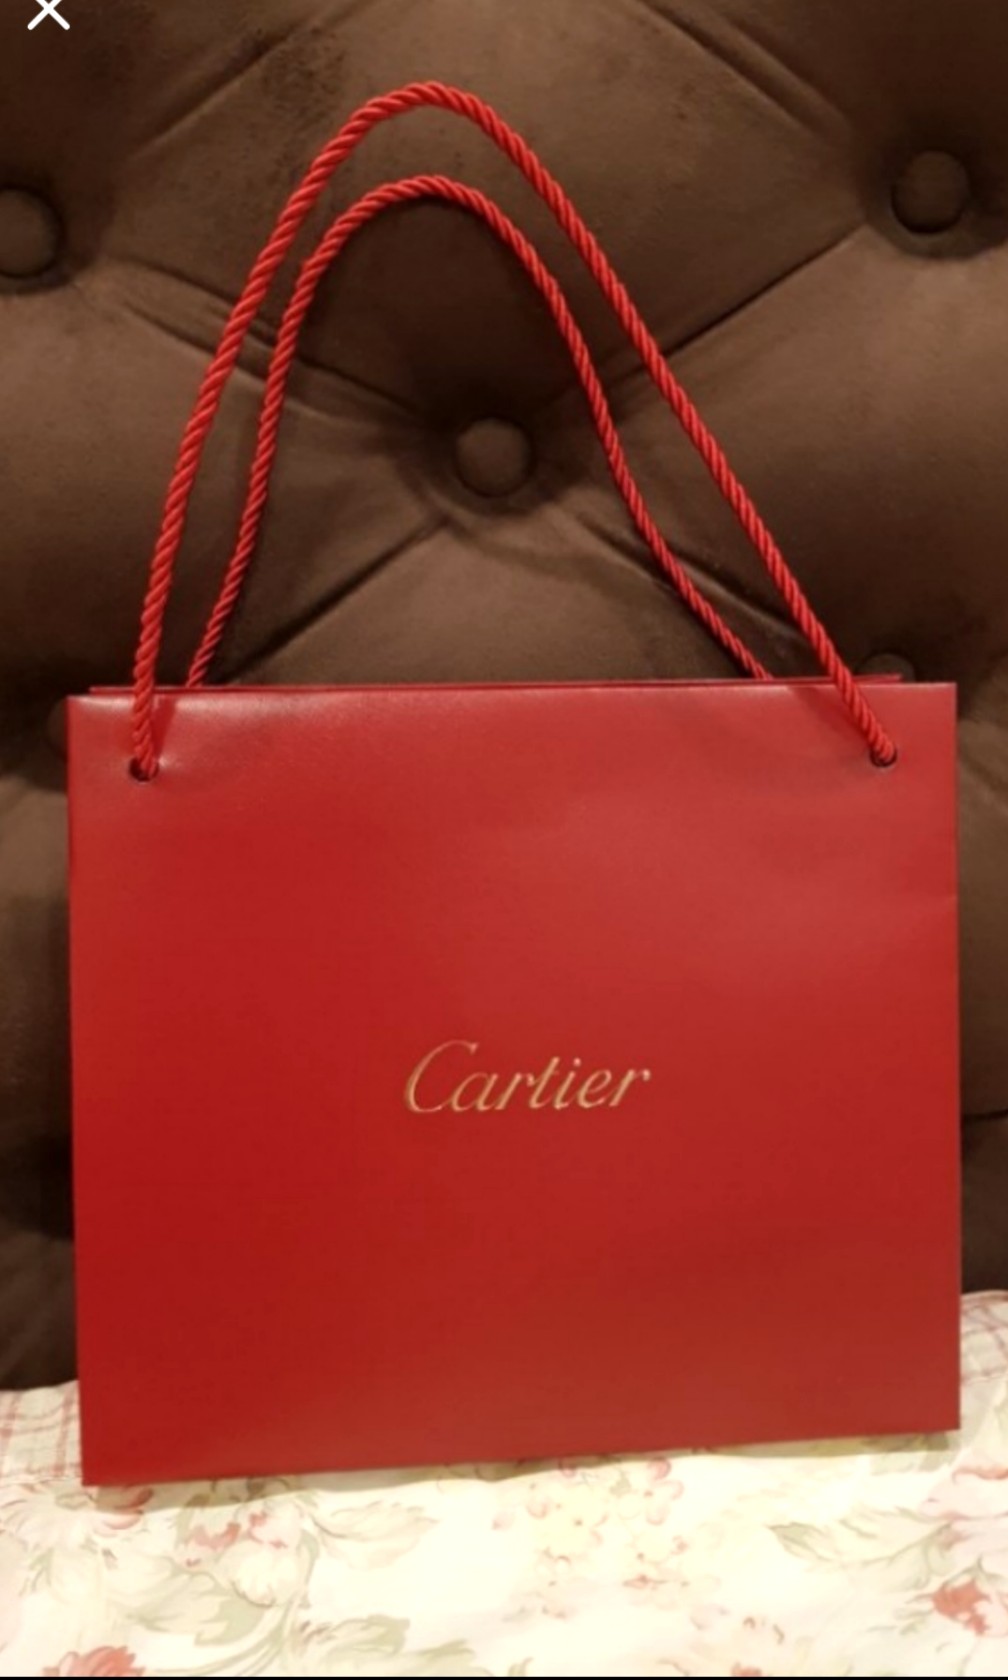 Brand new authentic CARTIER Gift Bag, CARTIER Paper Carrier - 10